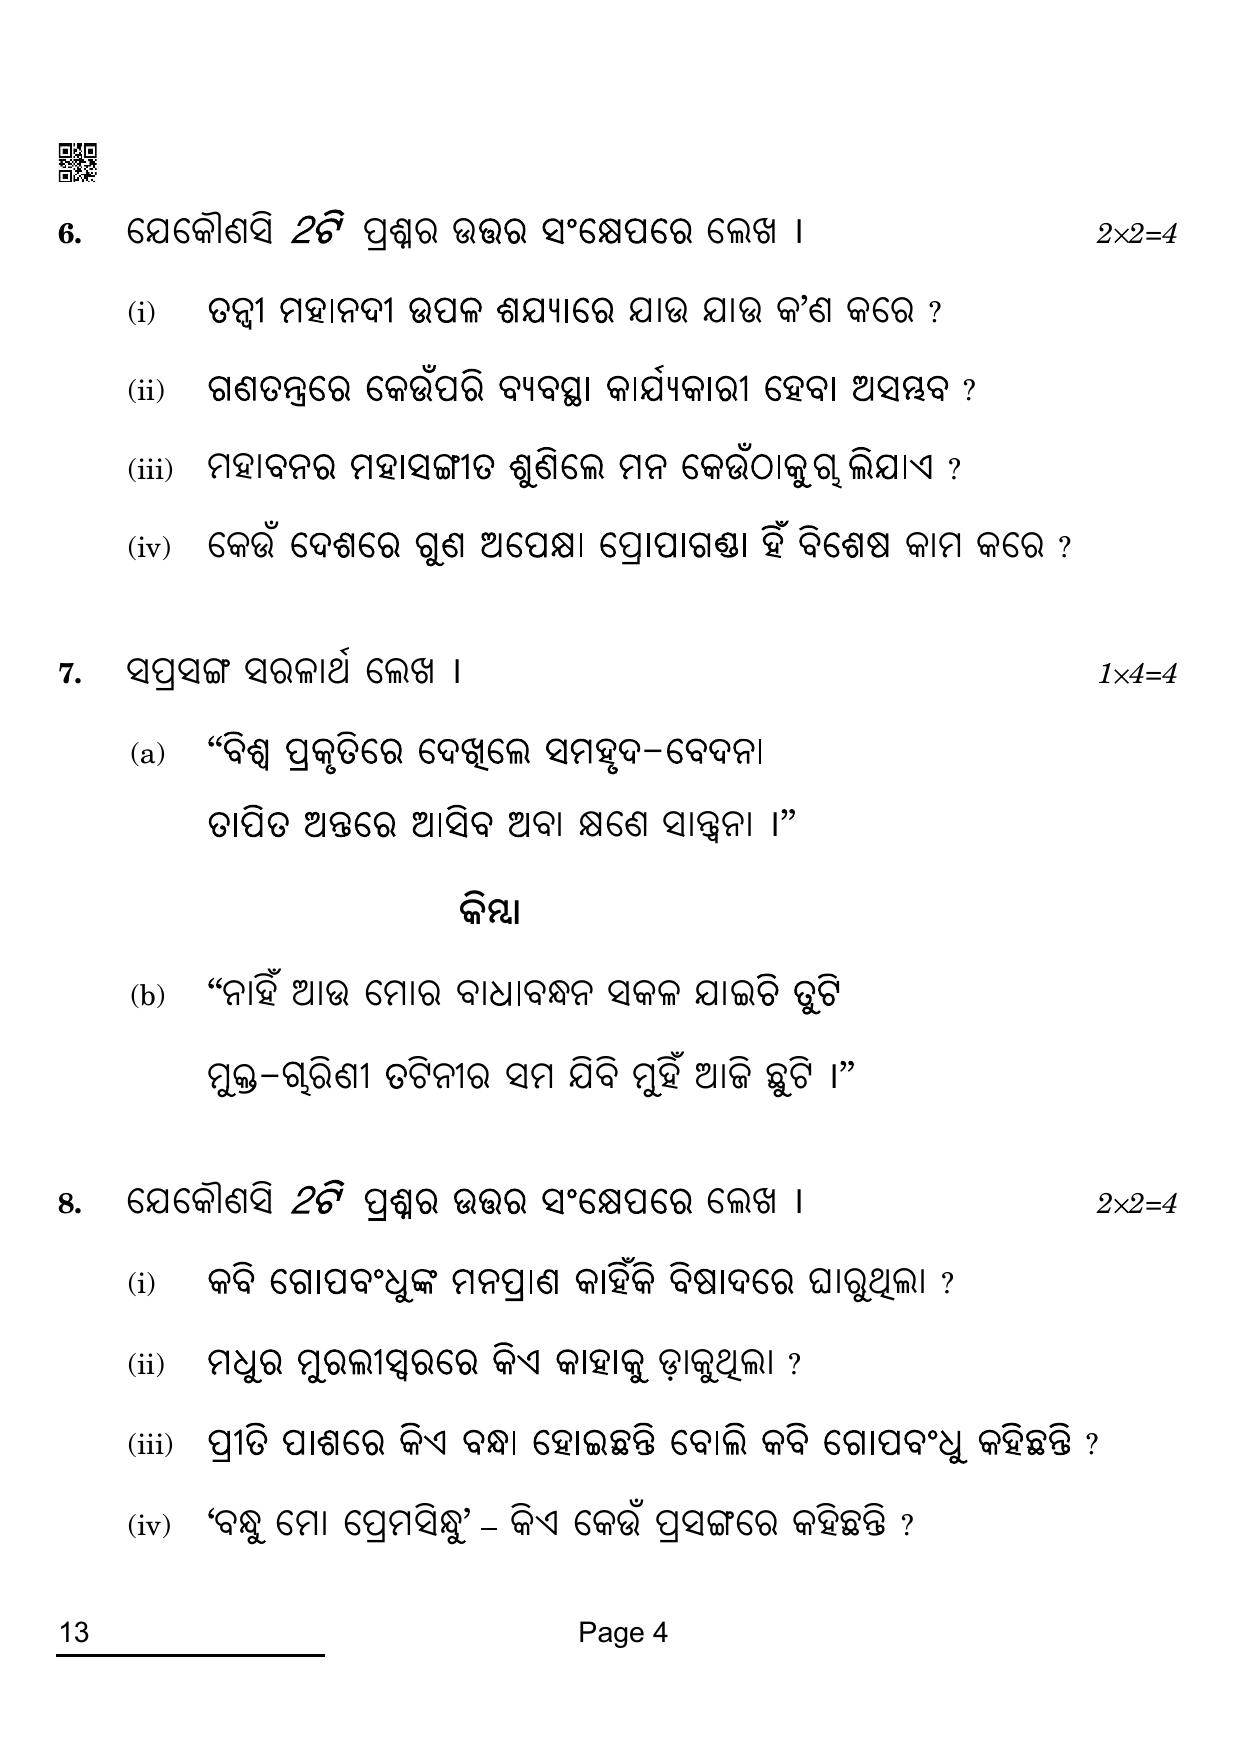 CBSE Class 12 13 ODIA 2022 Compartment Question Paper - Page 4